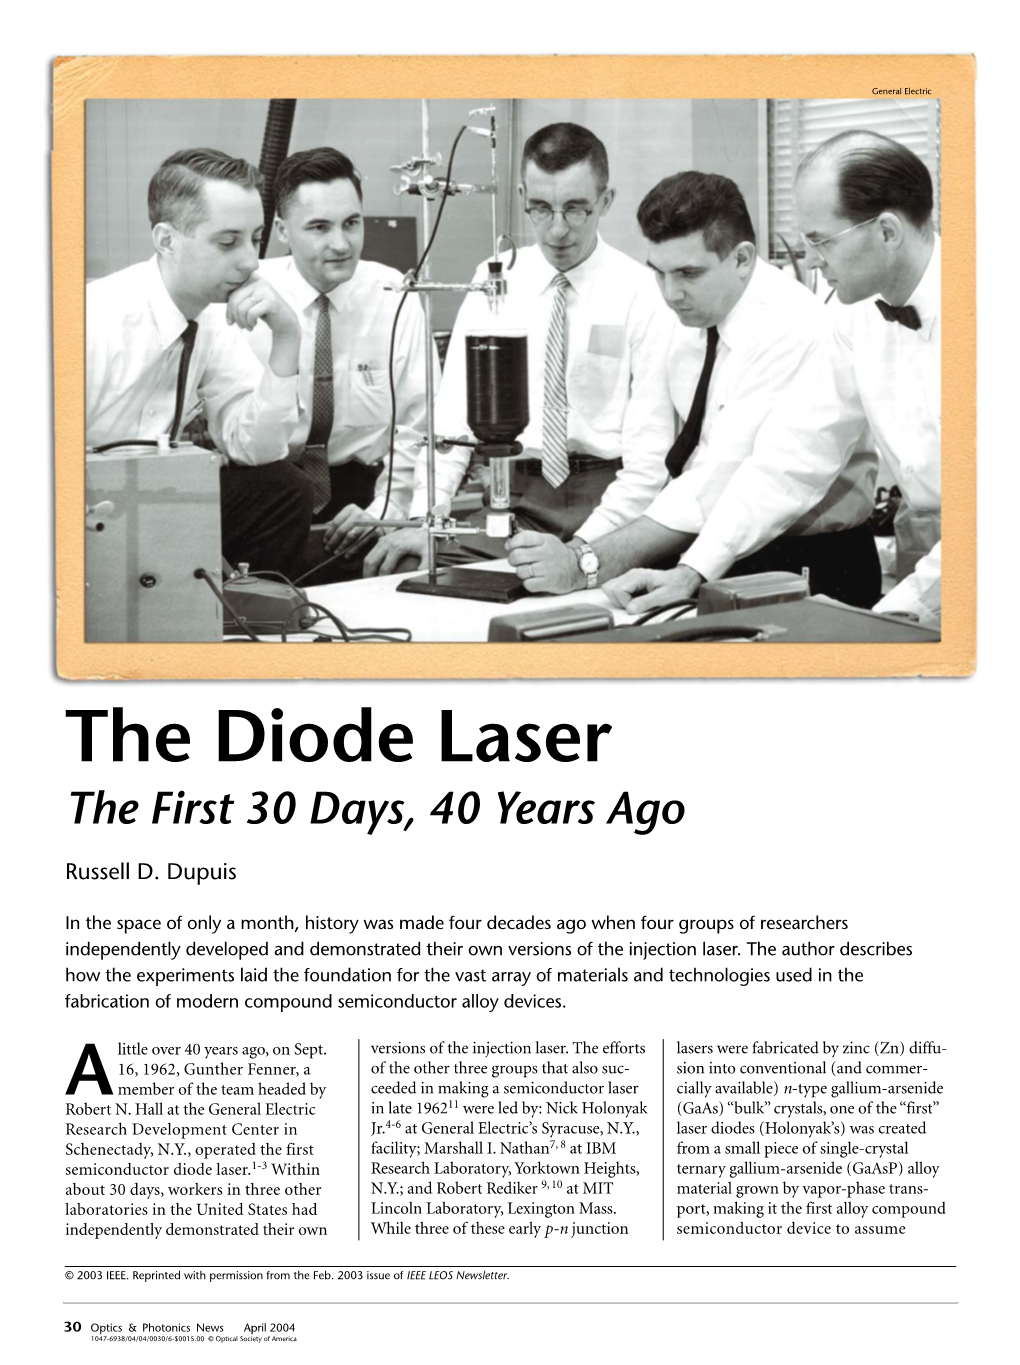 The Diode Laser the First 30 Days, 40 Years Ago